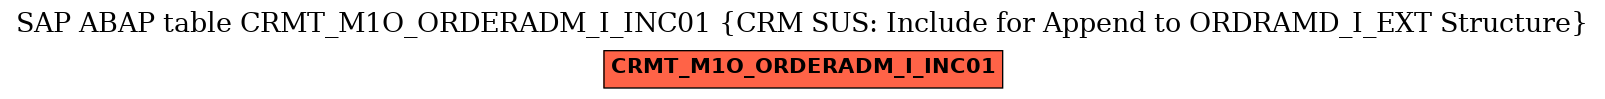 E-R Diagram for table CRMT_M1O_ORDERADM_I_INC01 (CRM SUS: Include for Append to ORDRAMD_I_EXT Structure)